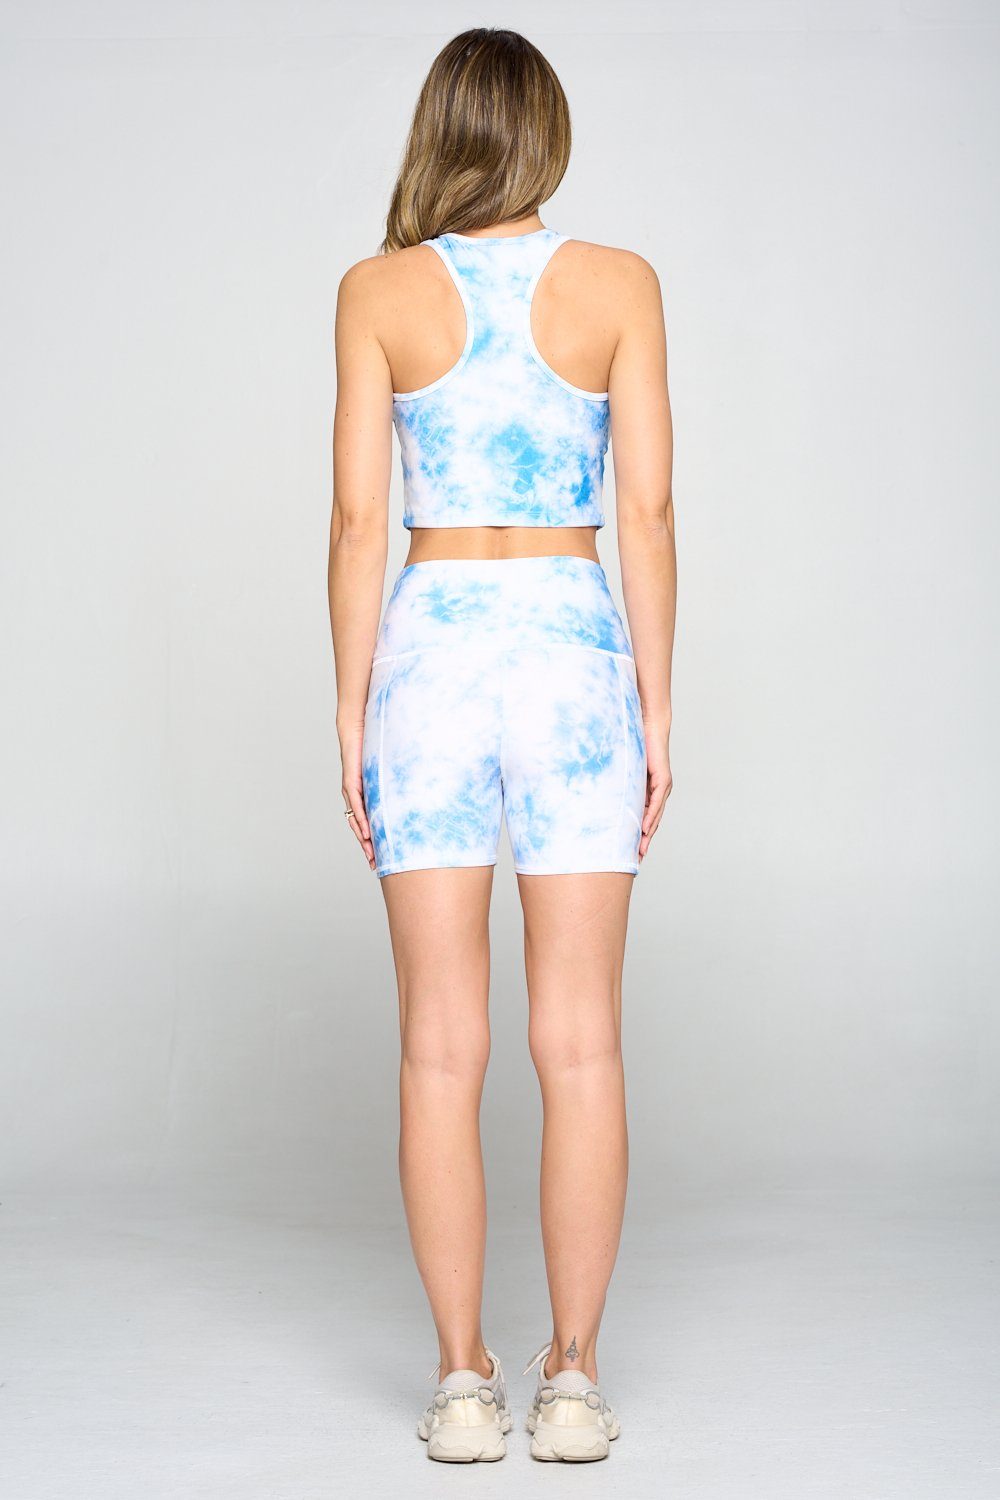 Kendall - Blue Cloud Compression Crop Tank by EVCR